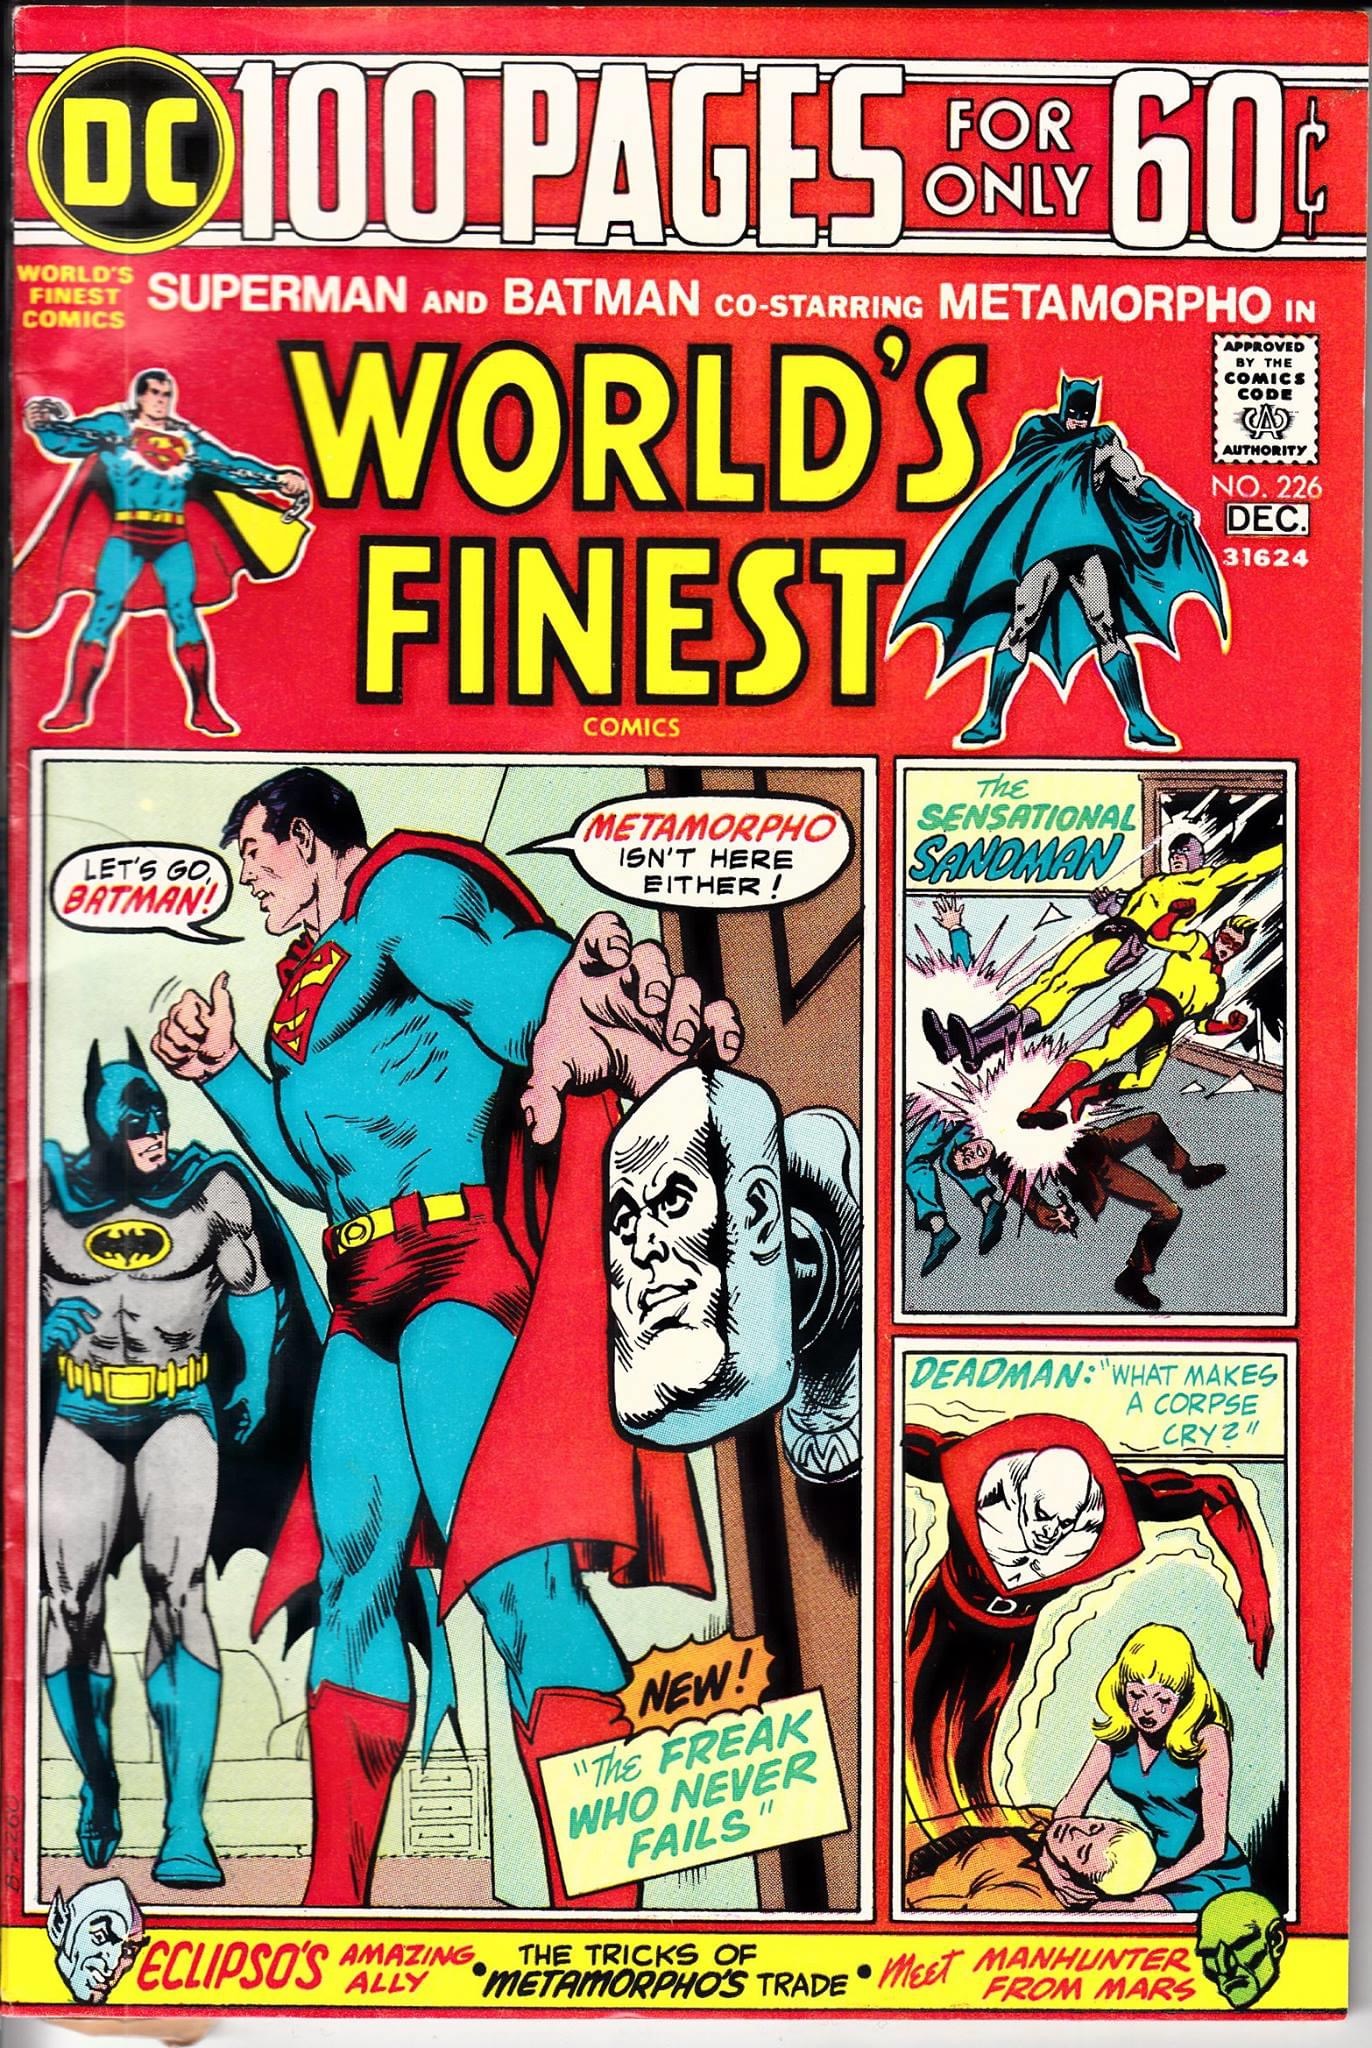 world's finest - Superman And Batman CoStarring Metamorpho In Oc 100 Pages.Co 60C World'S Finestlan Metamoroho Laman Wit Mos Coro New! Freak Who Never Fails Execursos Amazing Rems Trade Mt Man